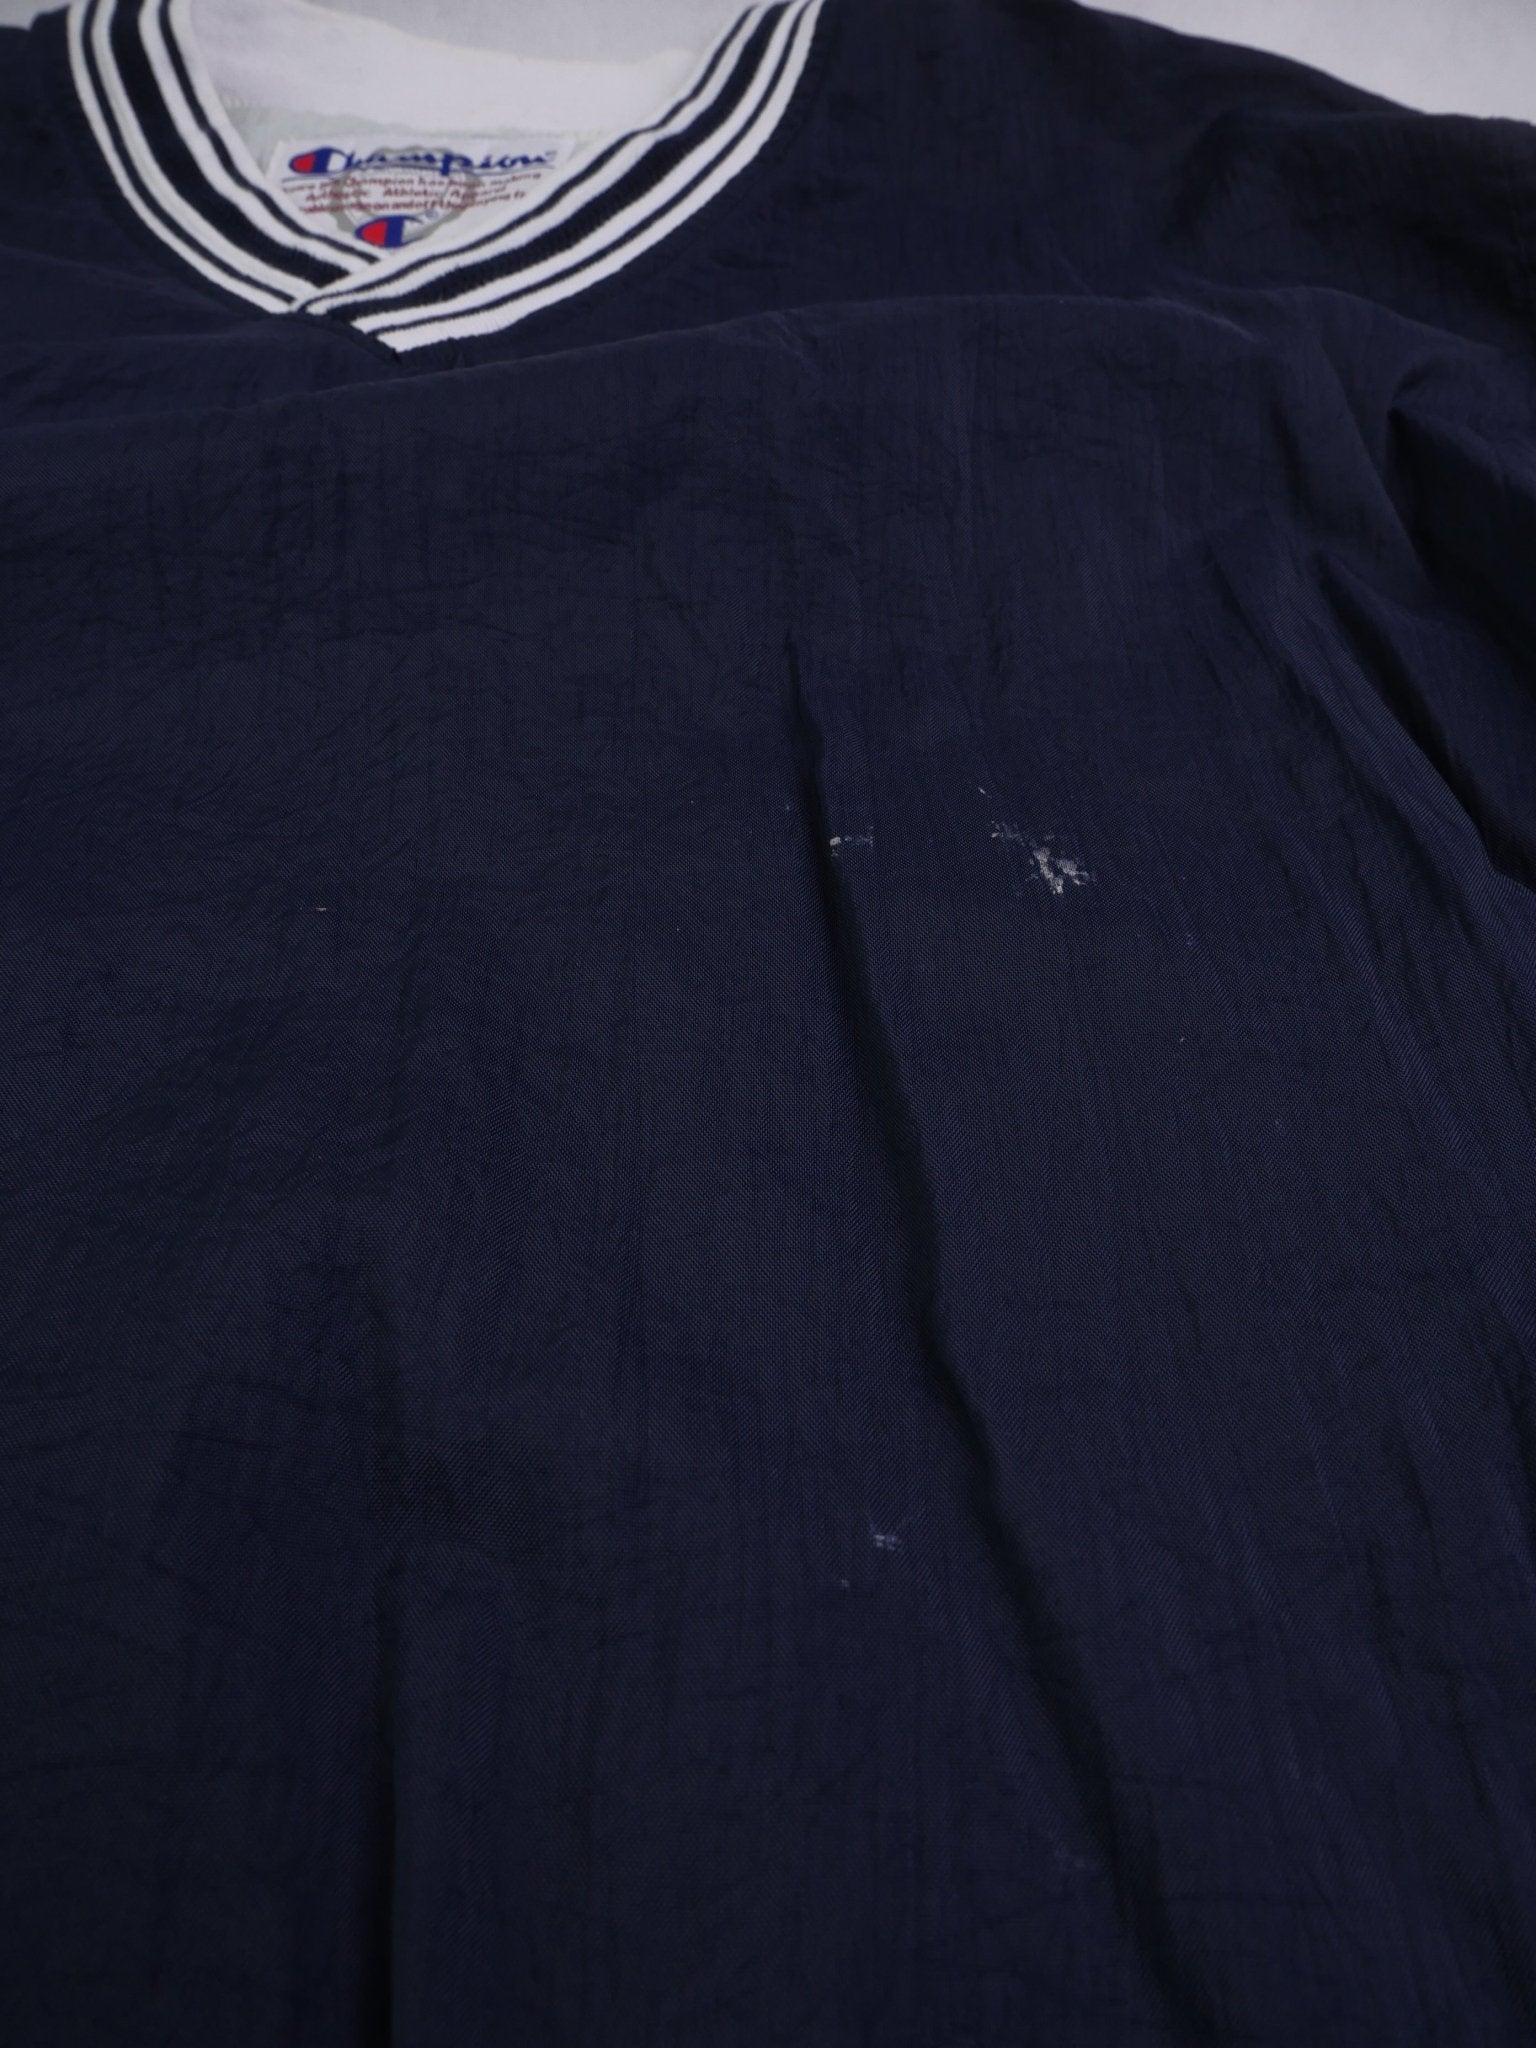 Champion embroidered Logo navy Jersey Sweater - Peeces